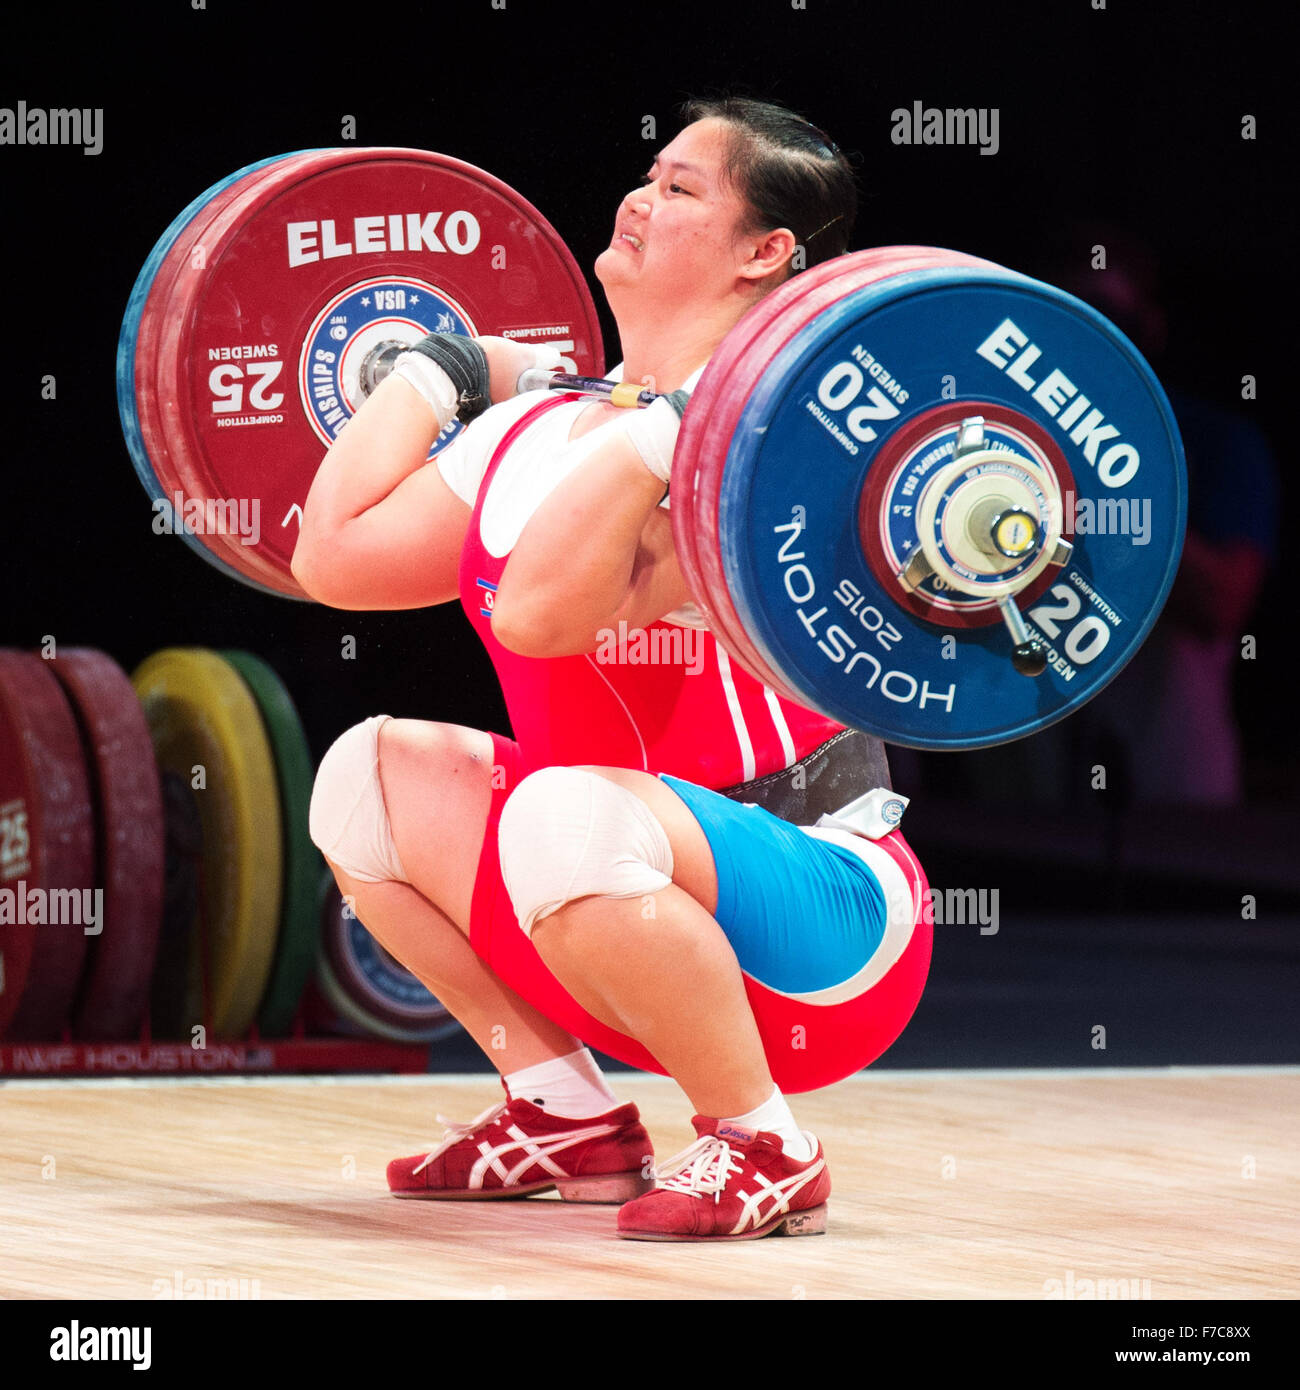 November 26, 2015: Kim Kuk Hyang of North Korea win the bronze medal in the clean and jerk and the total in the Womens 75+ Class at the World Weightlfting Championships in Houston, Texas. Brent Clark/Alamy Live News Stock Photo